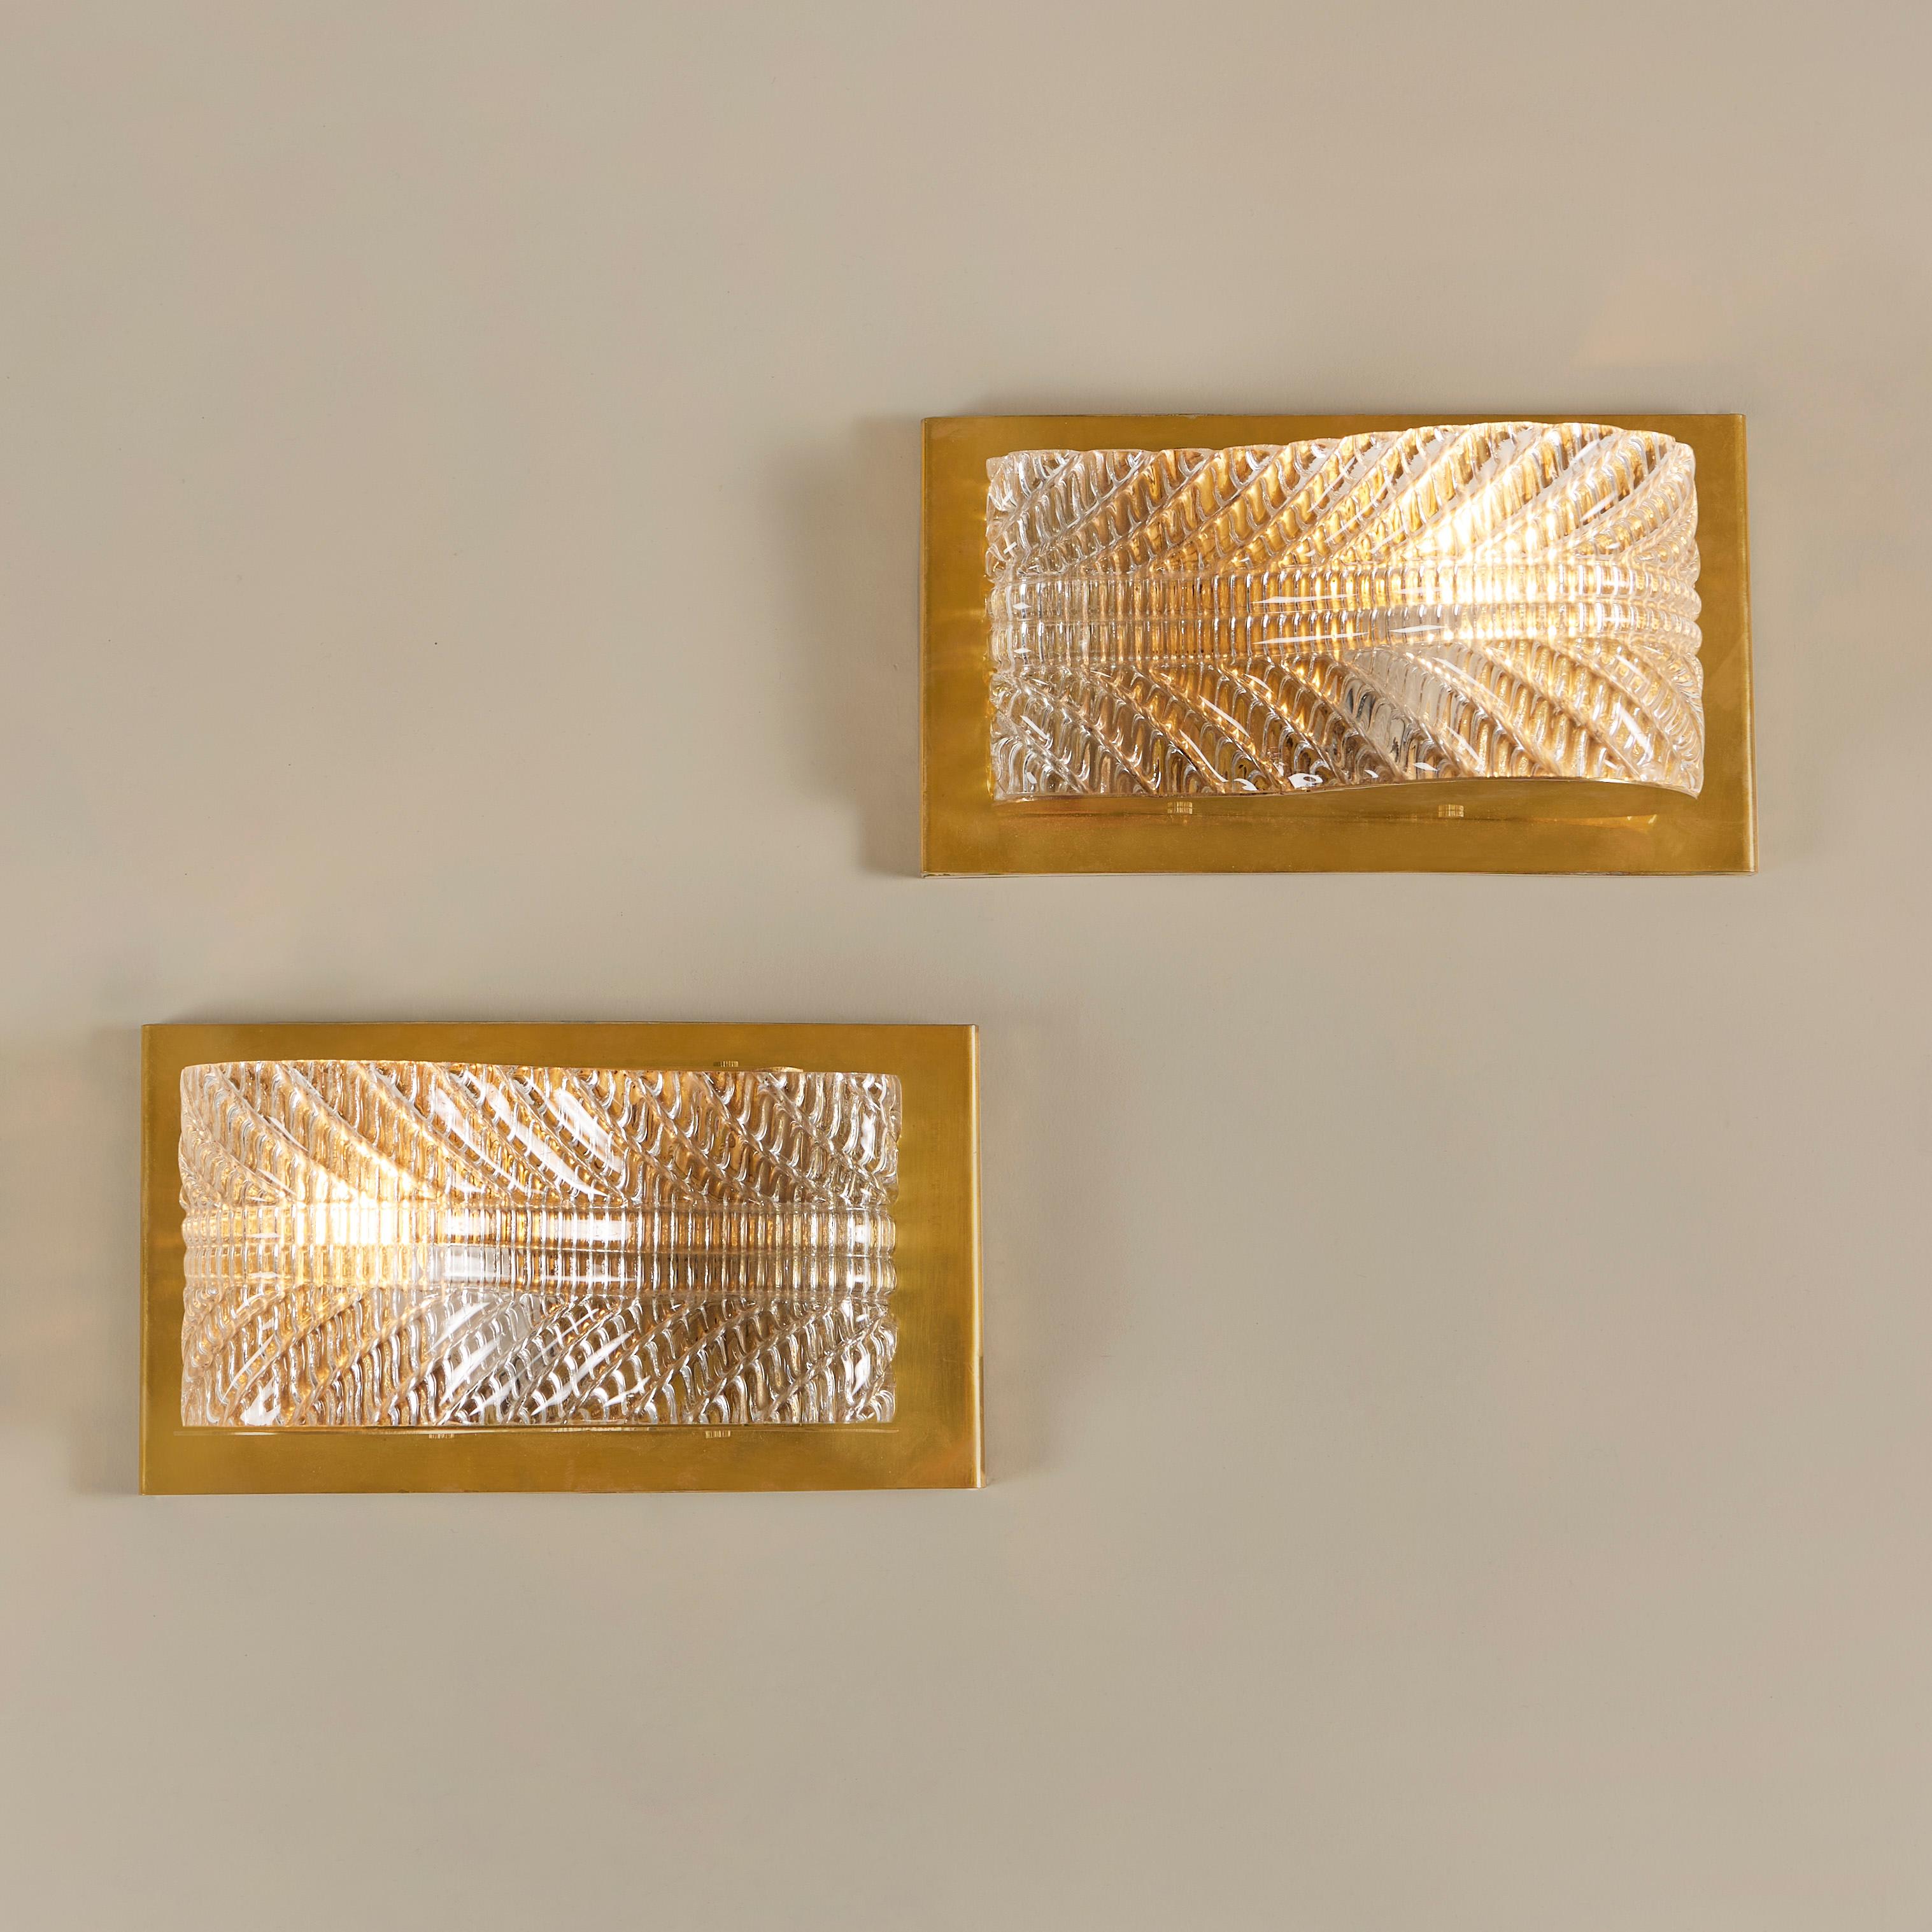 Pair of glamorous curved wall lights. Textured Murano glass with elegant detailing sits on rectangular brass baseplate. The reflection of textured glass and rich brass creates a flattering diffused light.
